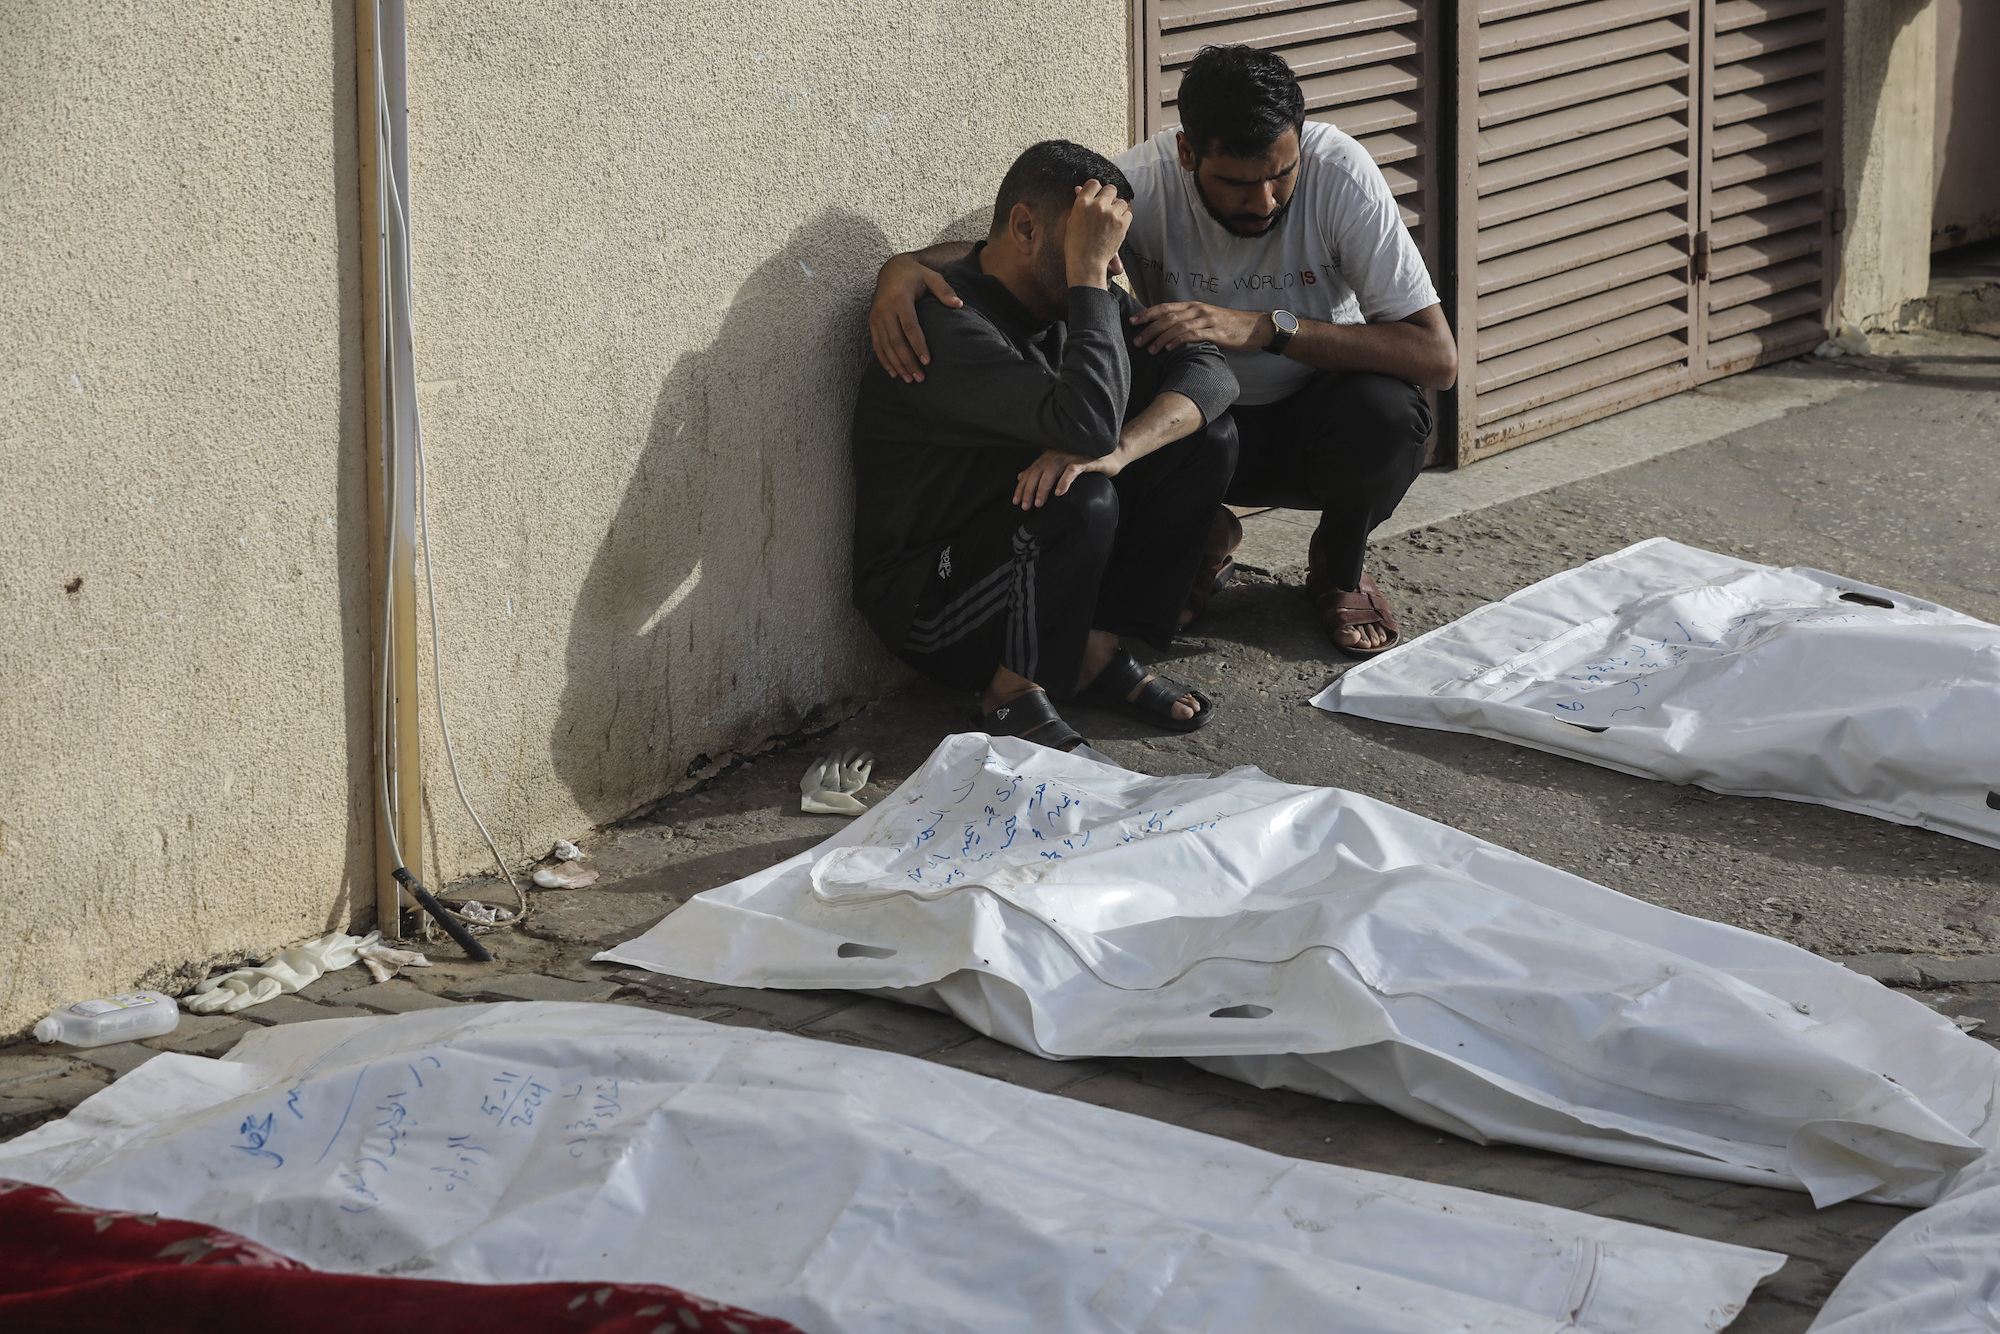 People mourn next to the bodies of Palestinians killed in an Israeli strike in Deir al-Balah, Gaza, on May 11.